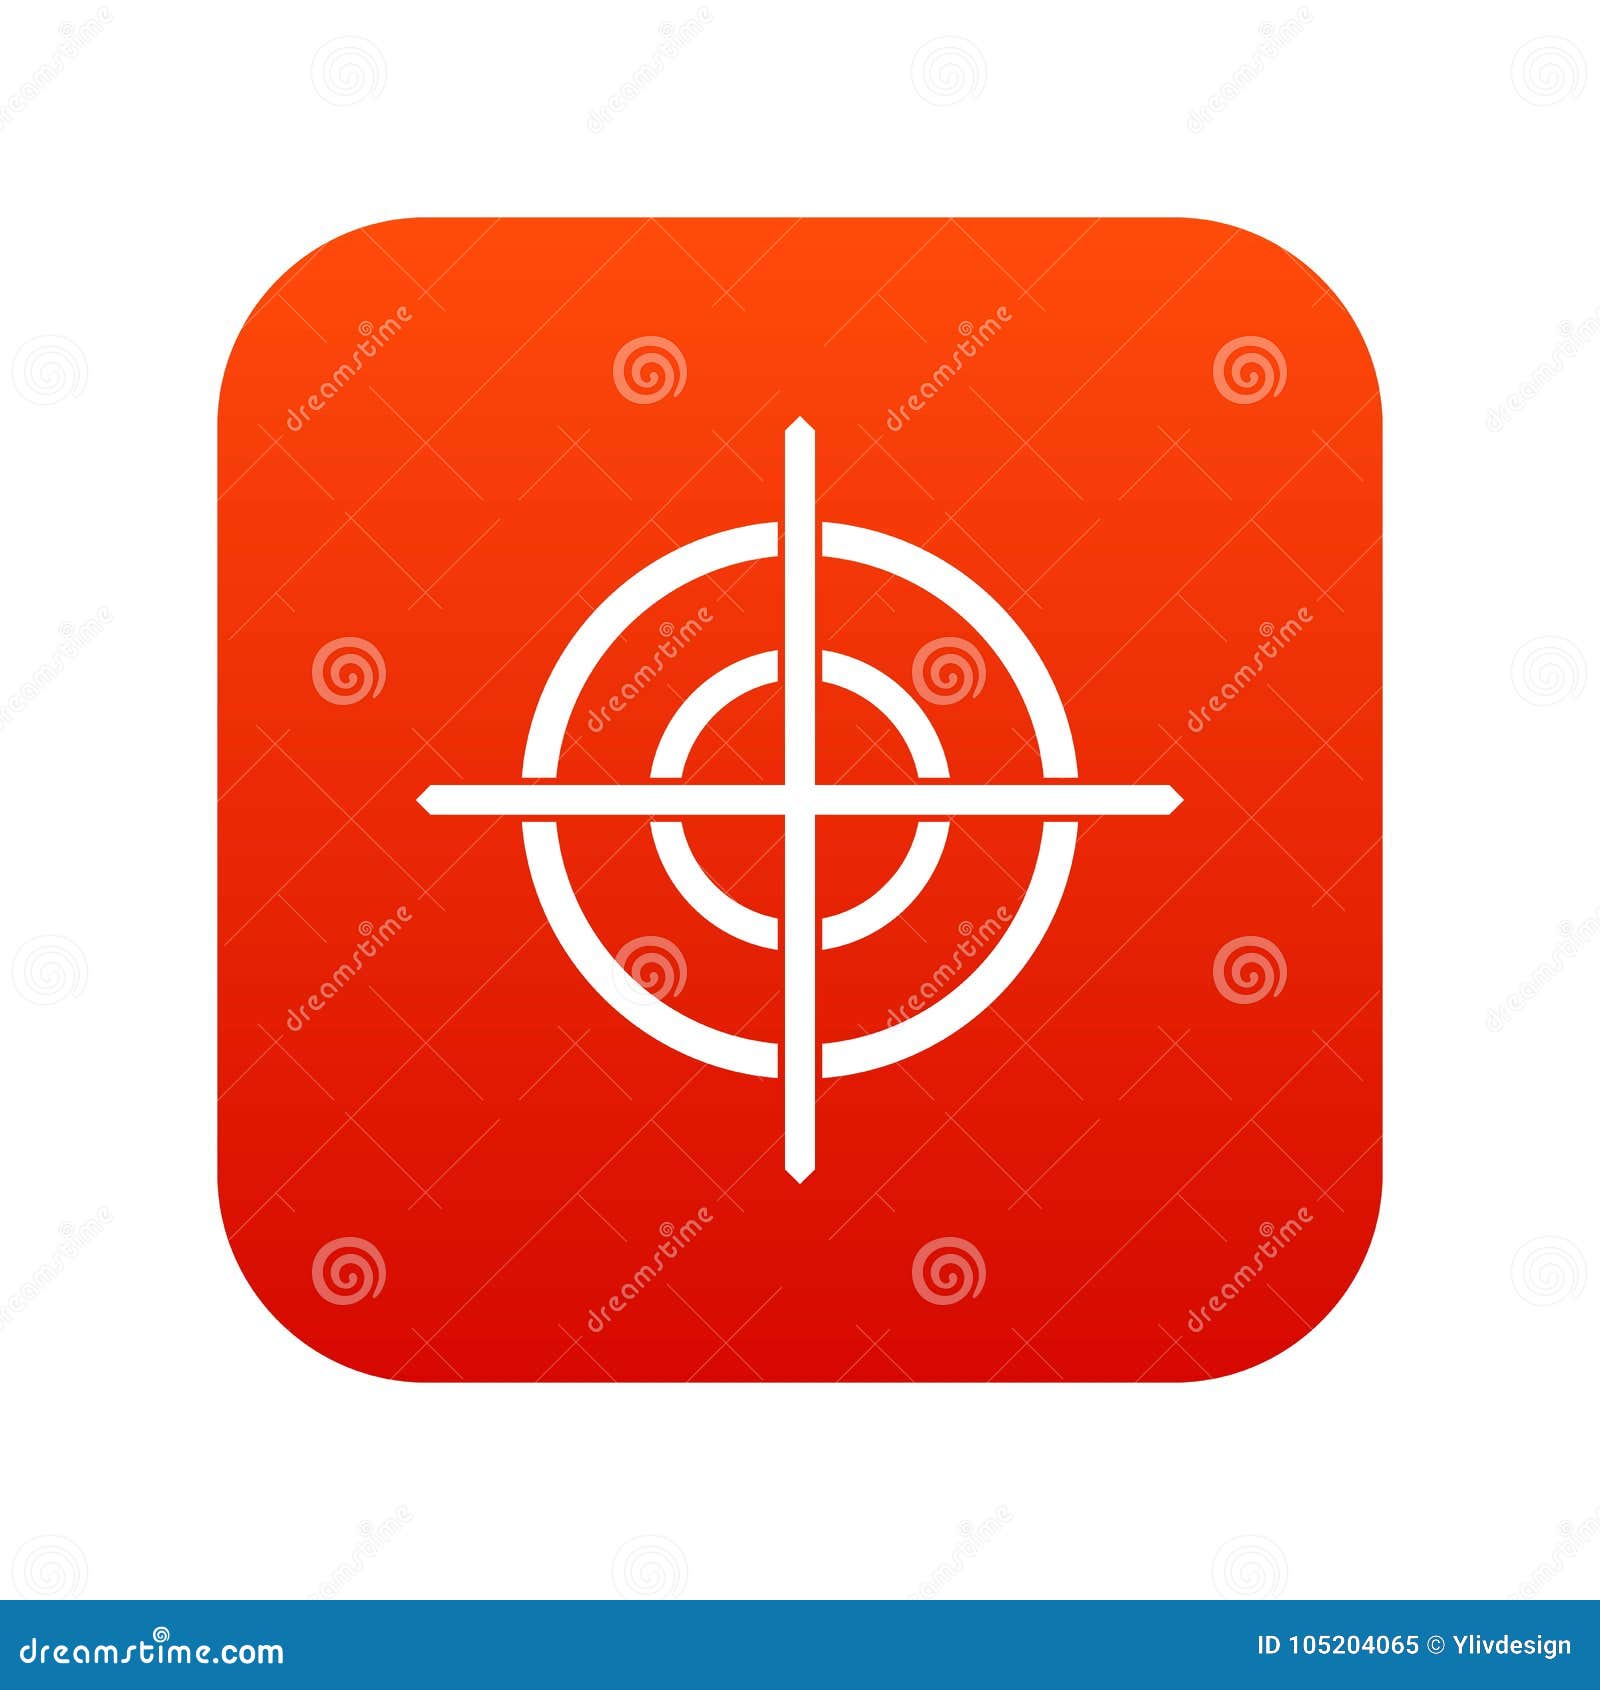 Target Crosshair Icon Digital Red Stock Vector - Illustration of sign ...